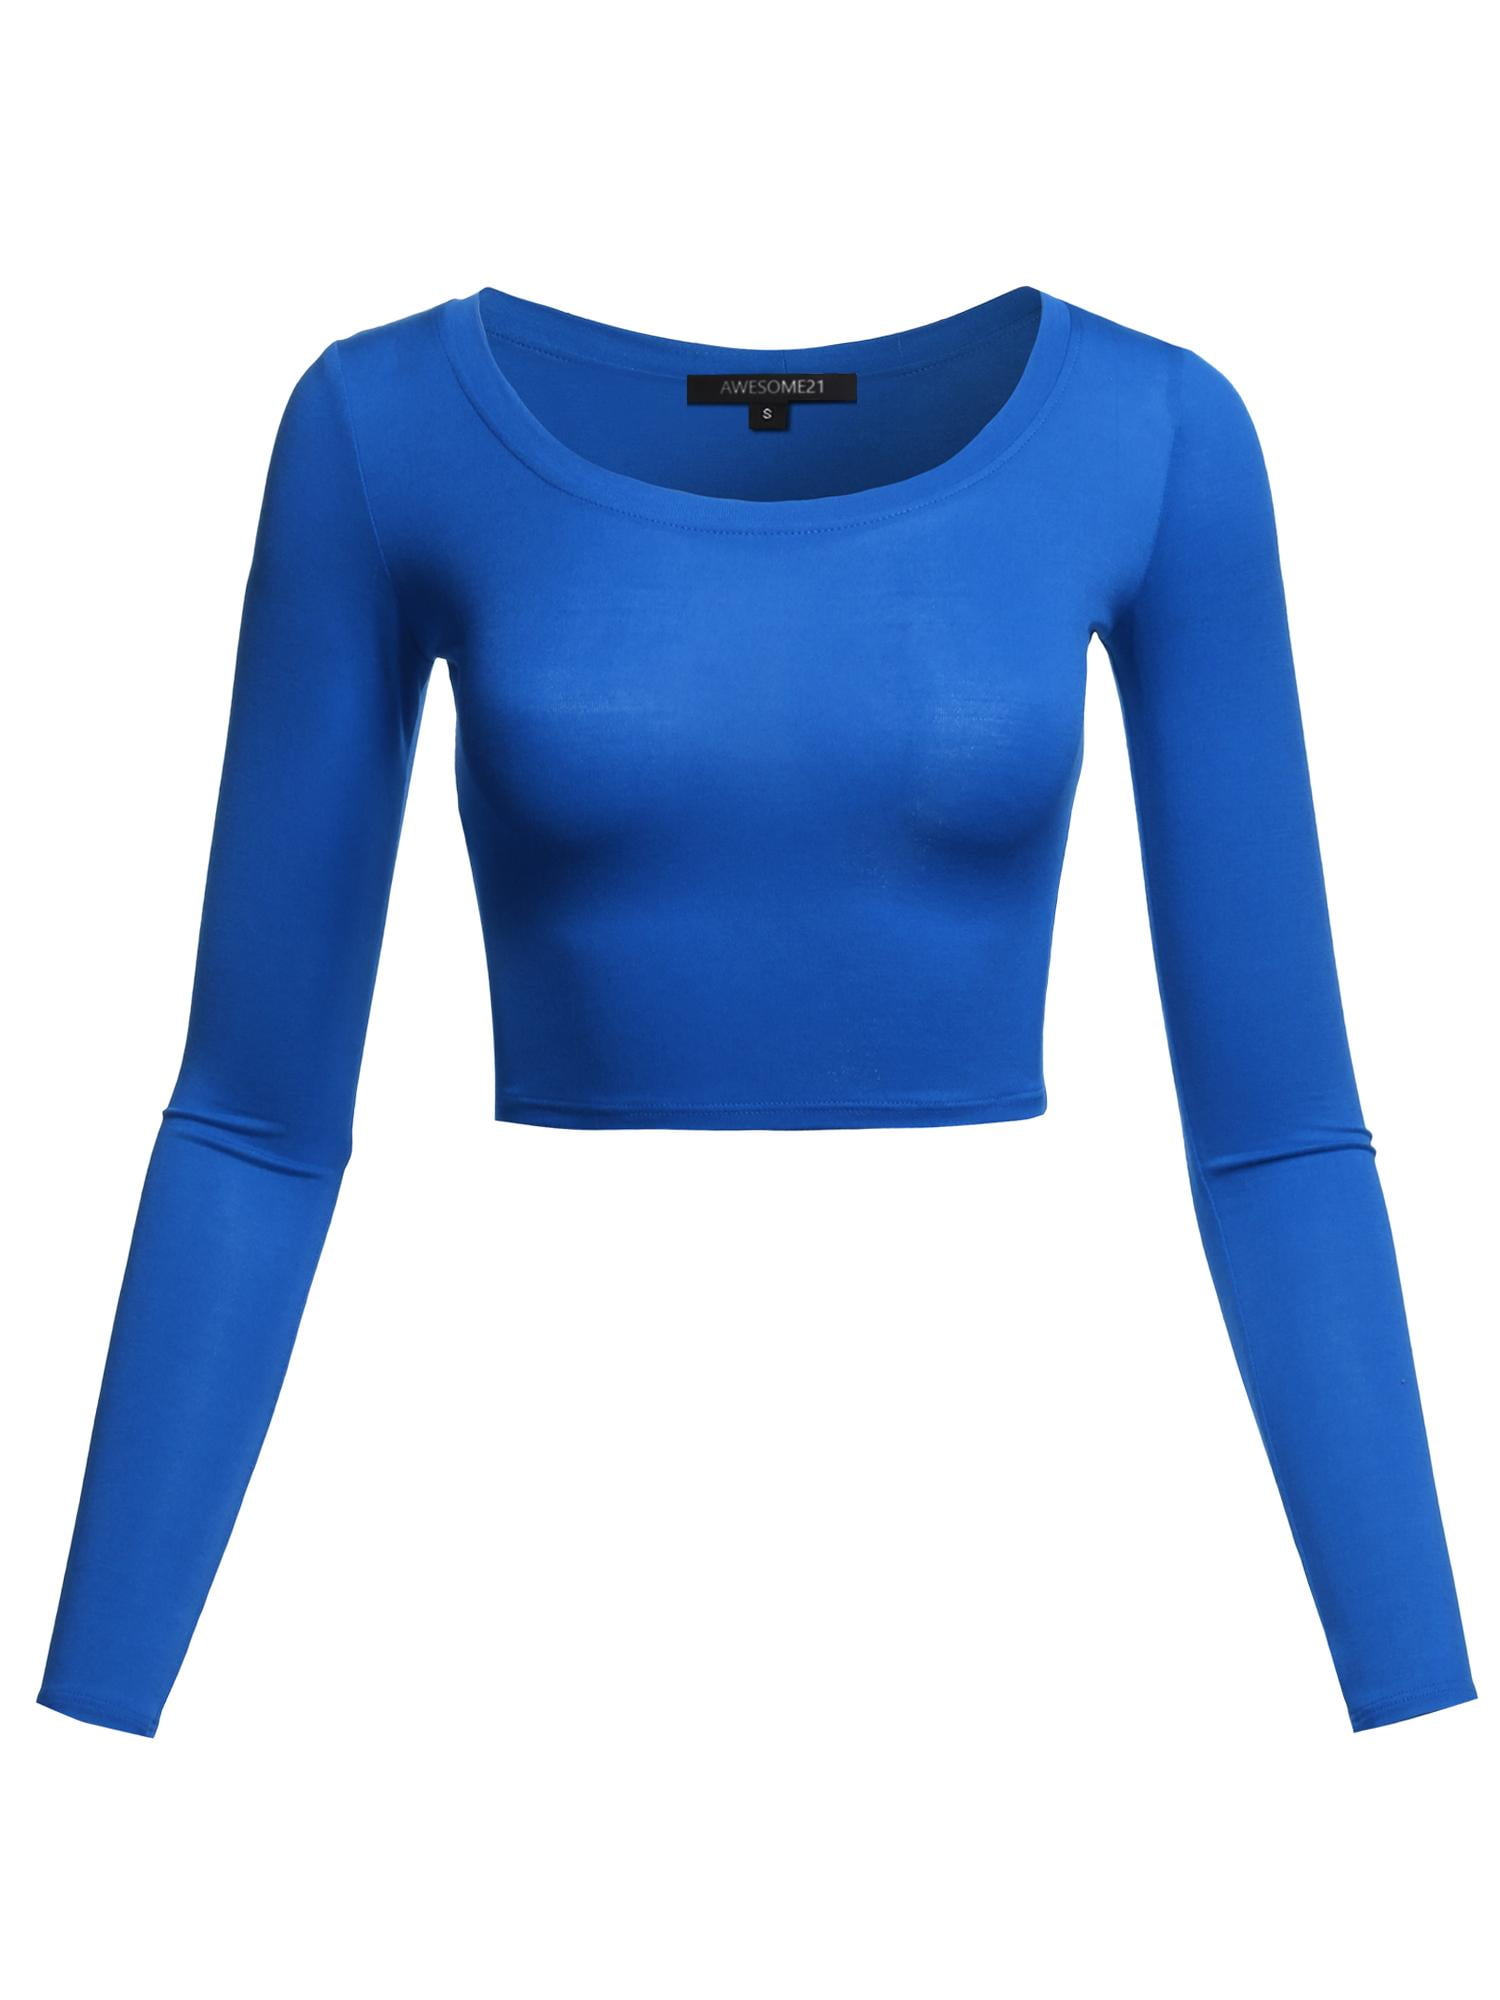 Awesome21 Womens Cold Shoulder Solid Top